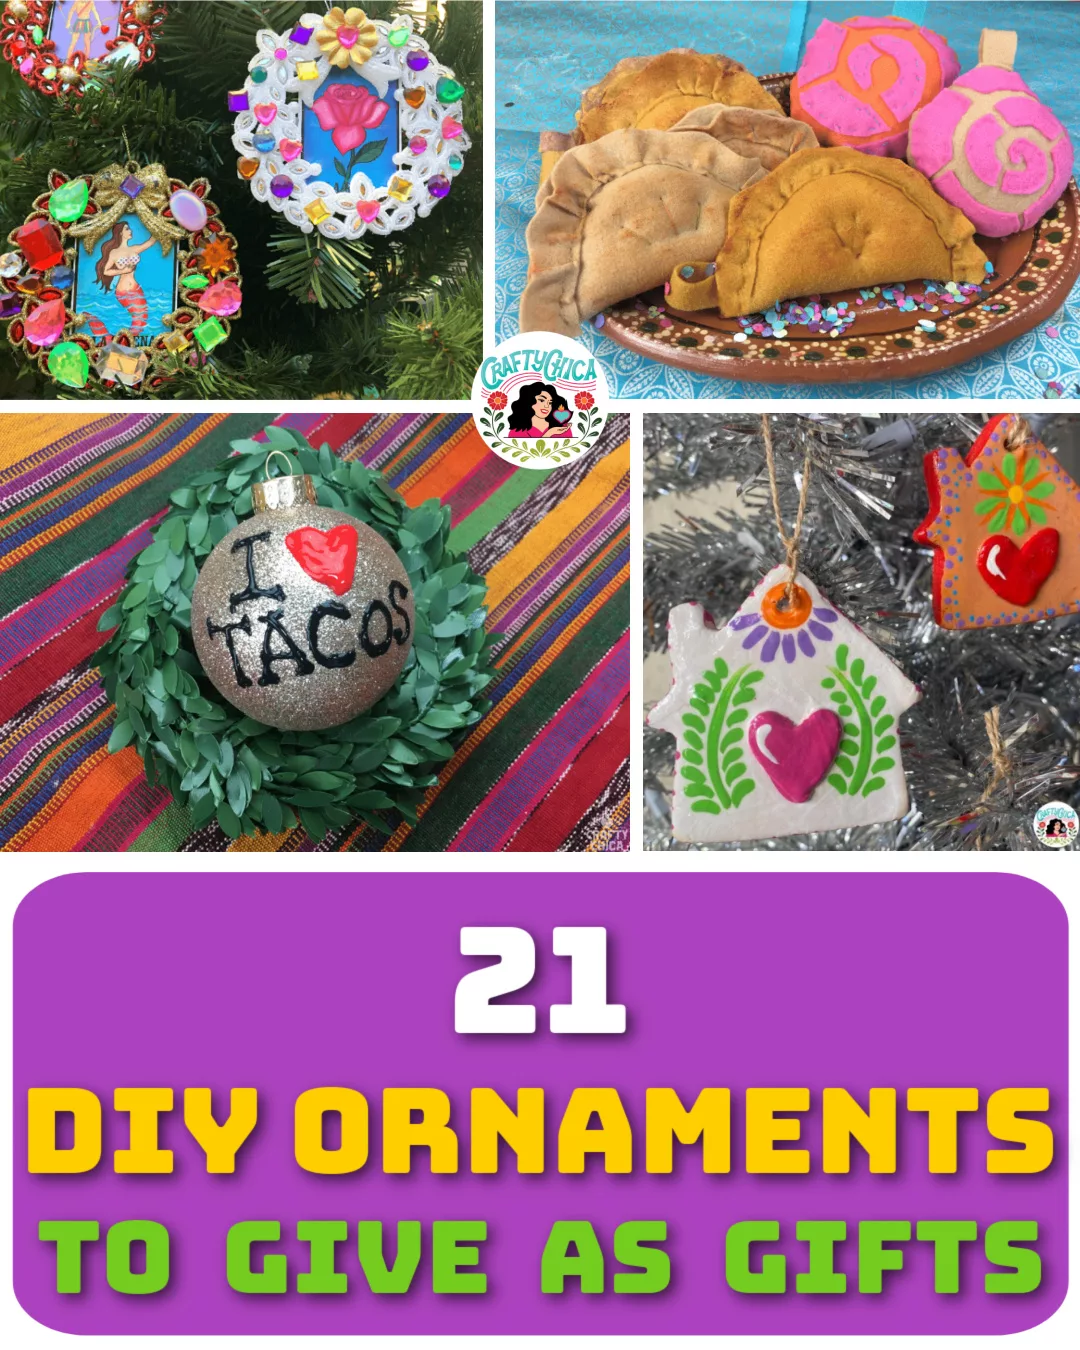 Ornaments to give as gifts - Mexican Christmas decorations